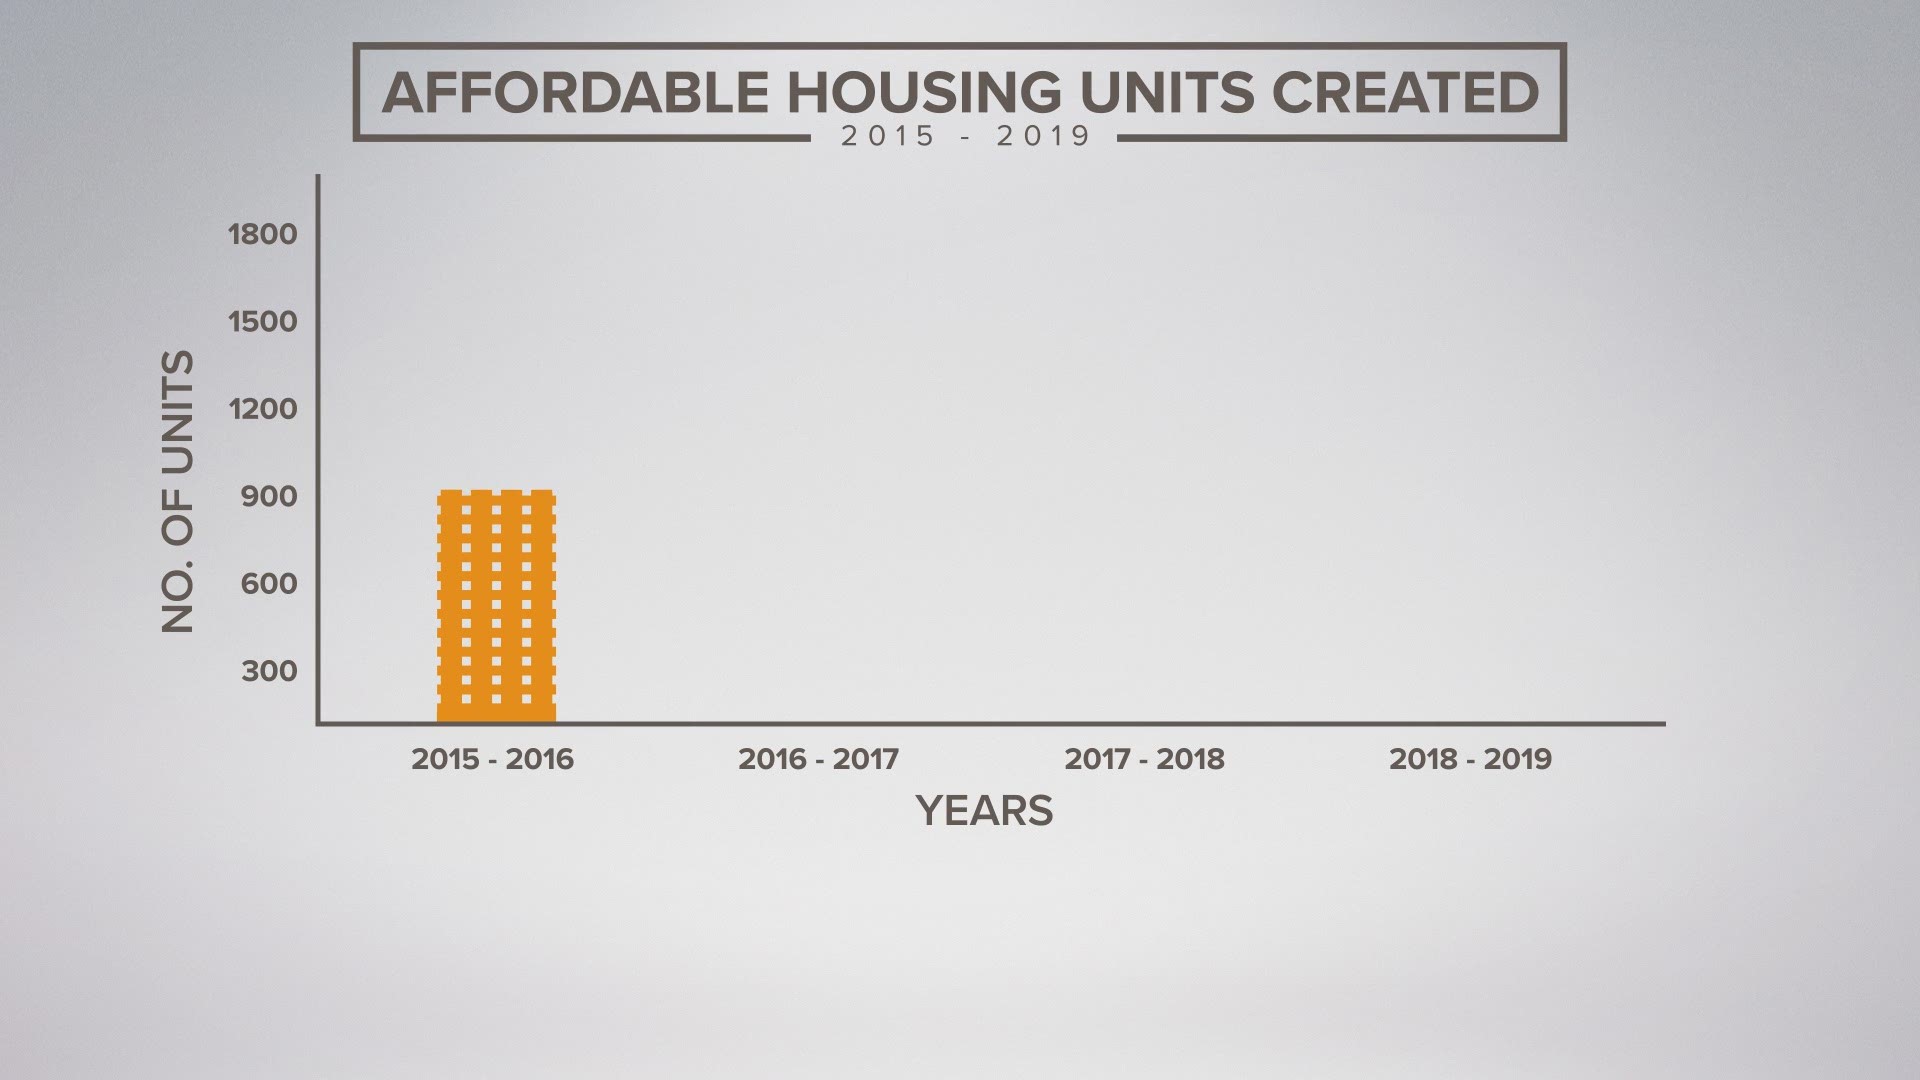 In 2015, 1,665 affordable housing units were created. In 2019, 661 affordable housing units were created.